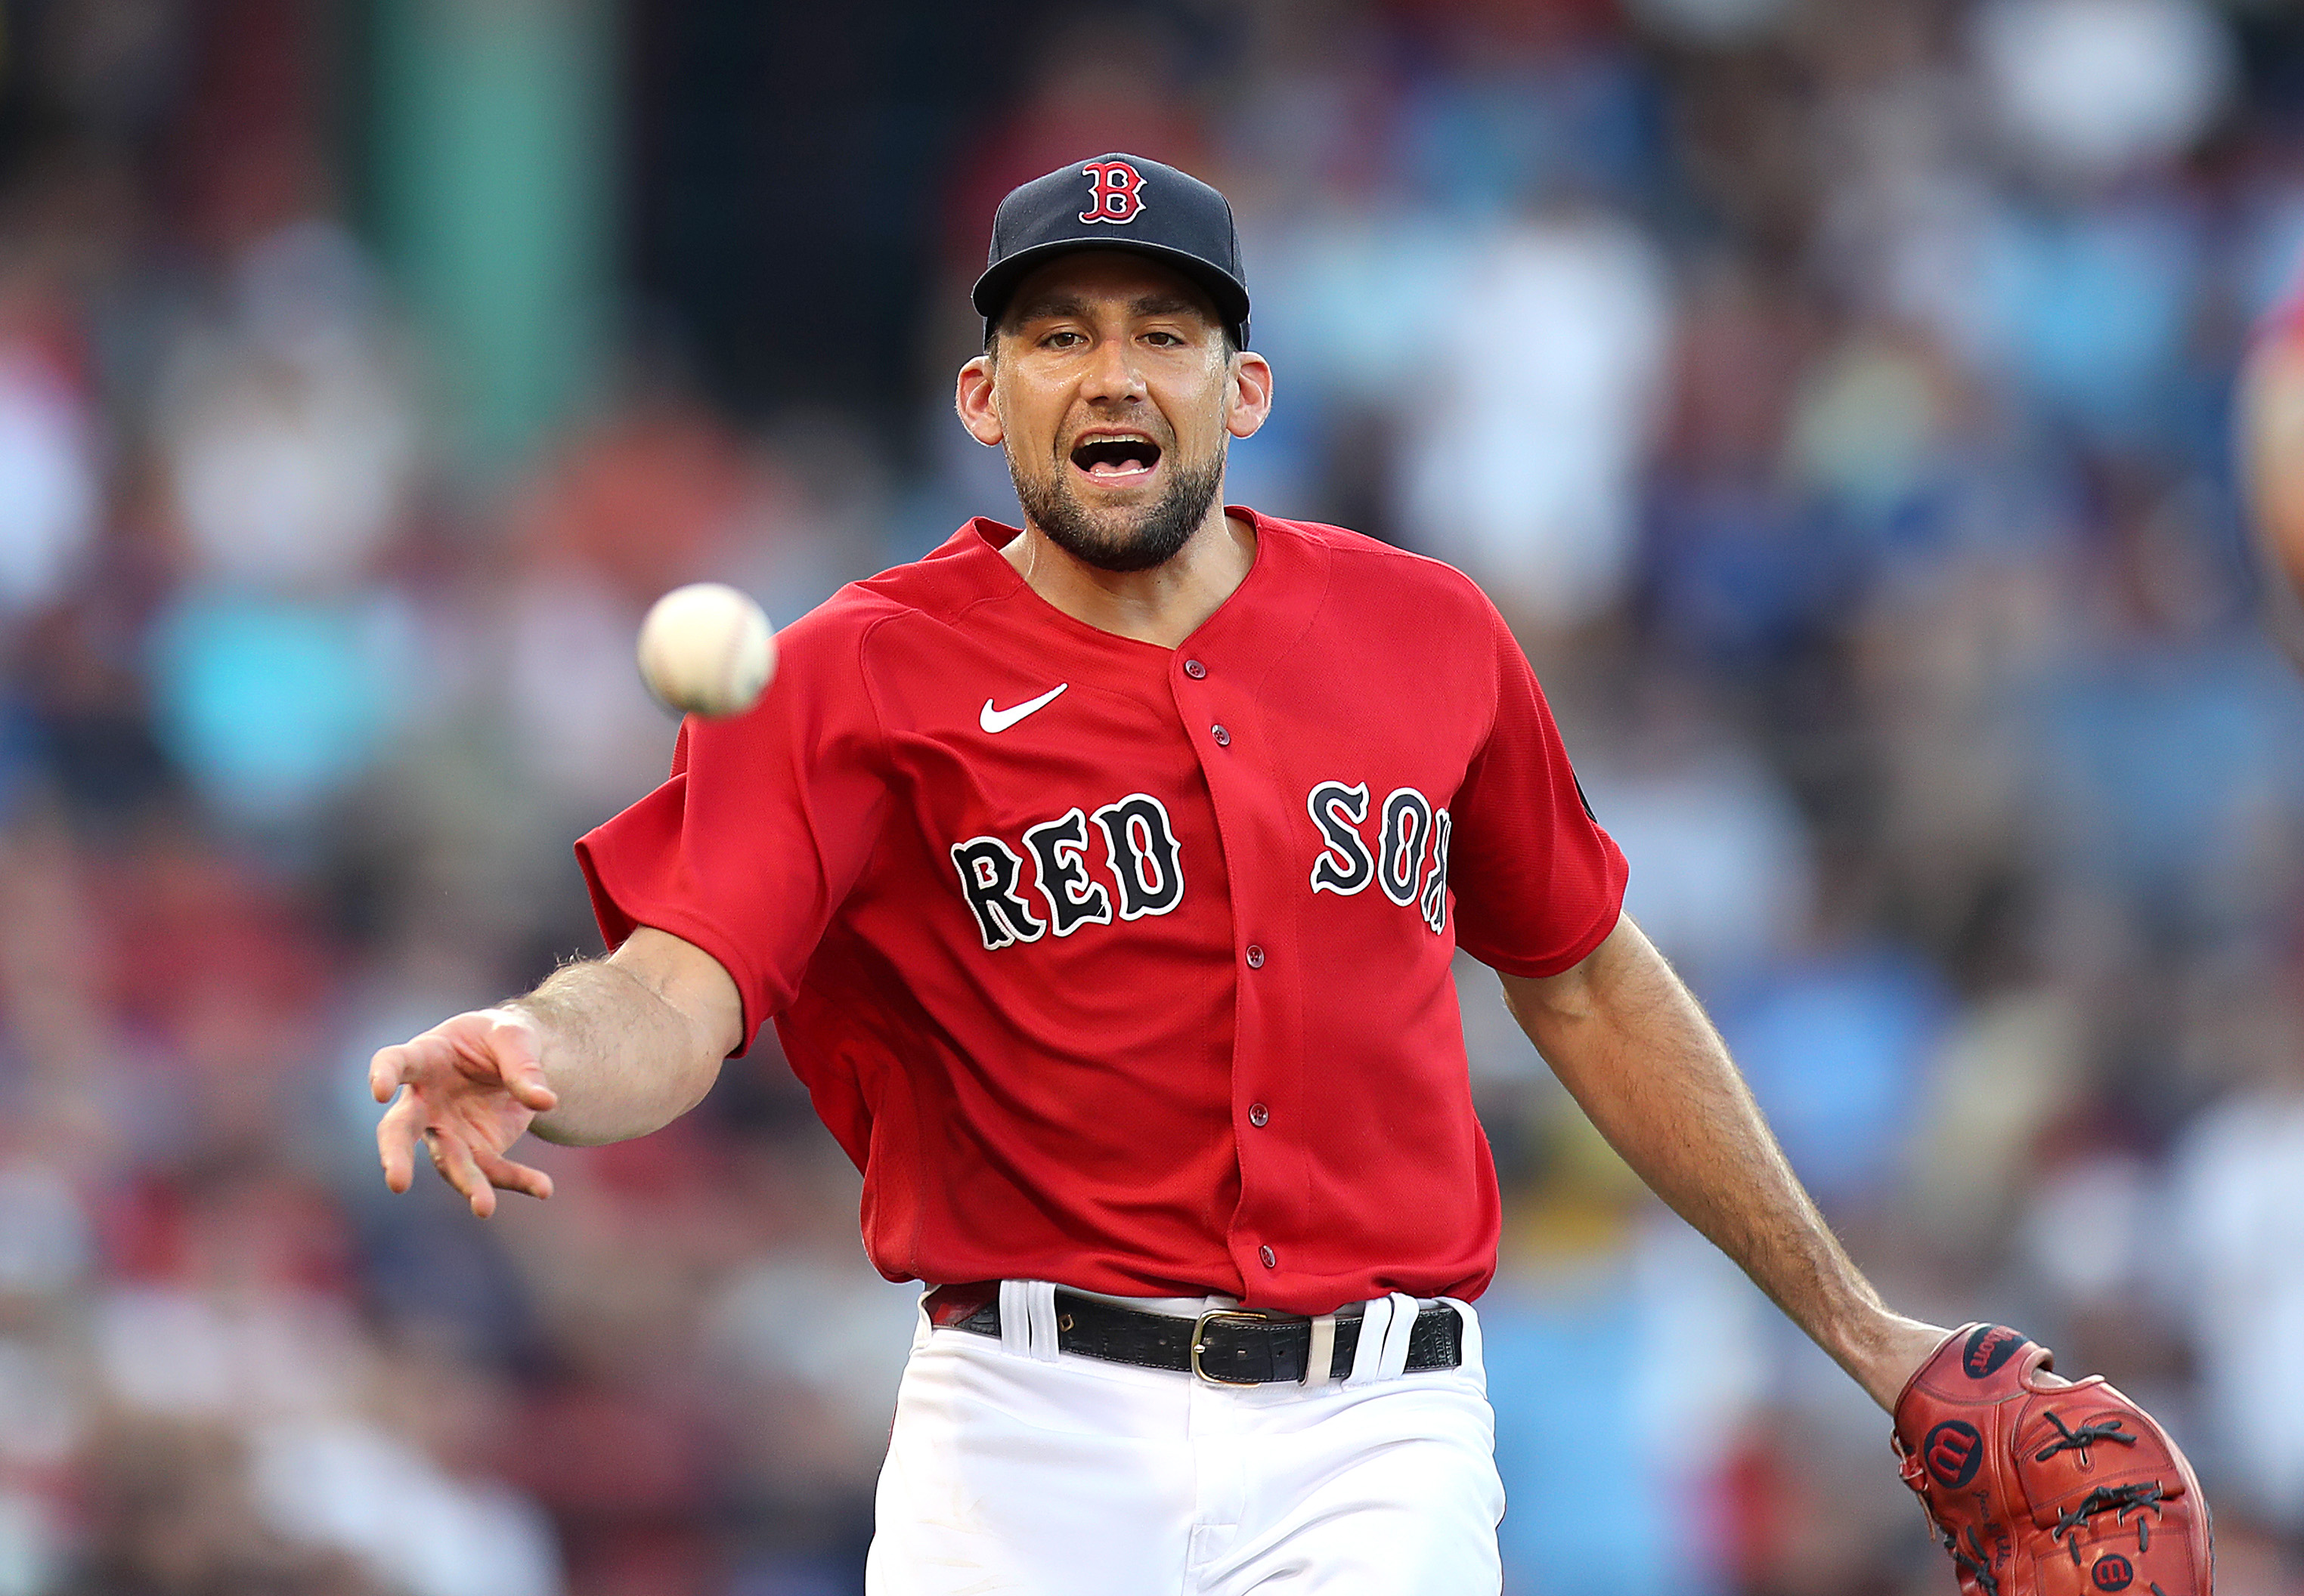 Nate Eovaldi stands and delivers for Red Sox in helping secure sweep of  Mariners - The Boston Globe